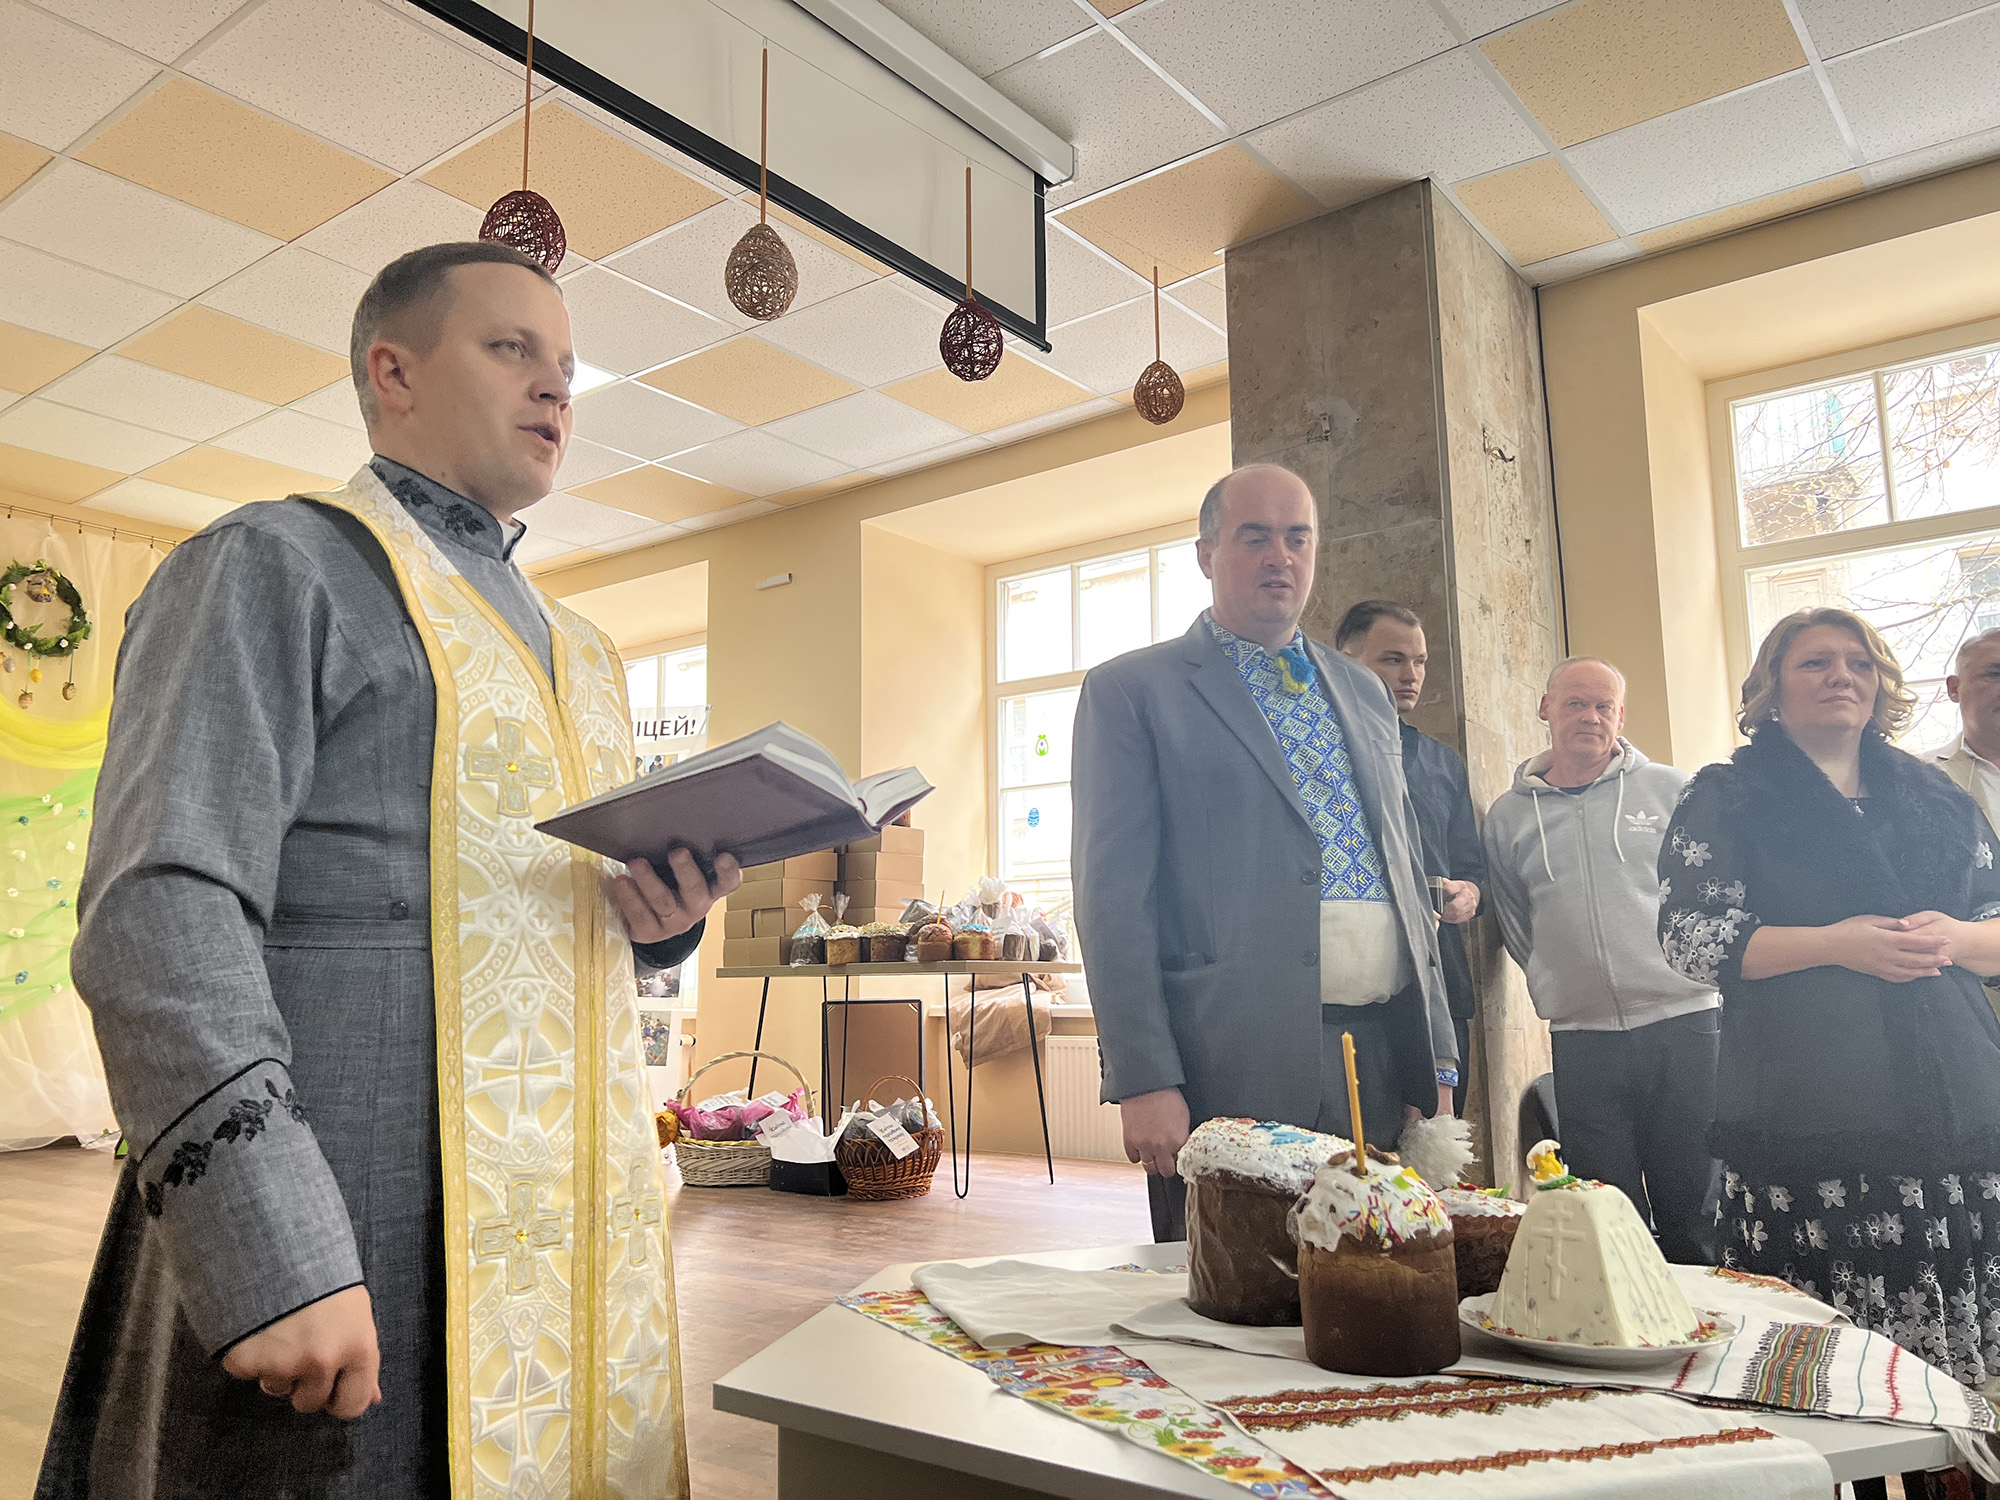 A priest delivers a short prayer before making his way around the room blessing the meal during a special Easter Sunday brunch for displaced Ukrainians in Lviv, Ukraine, on April 24.